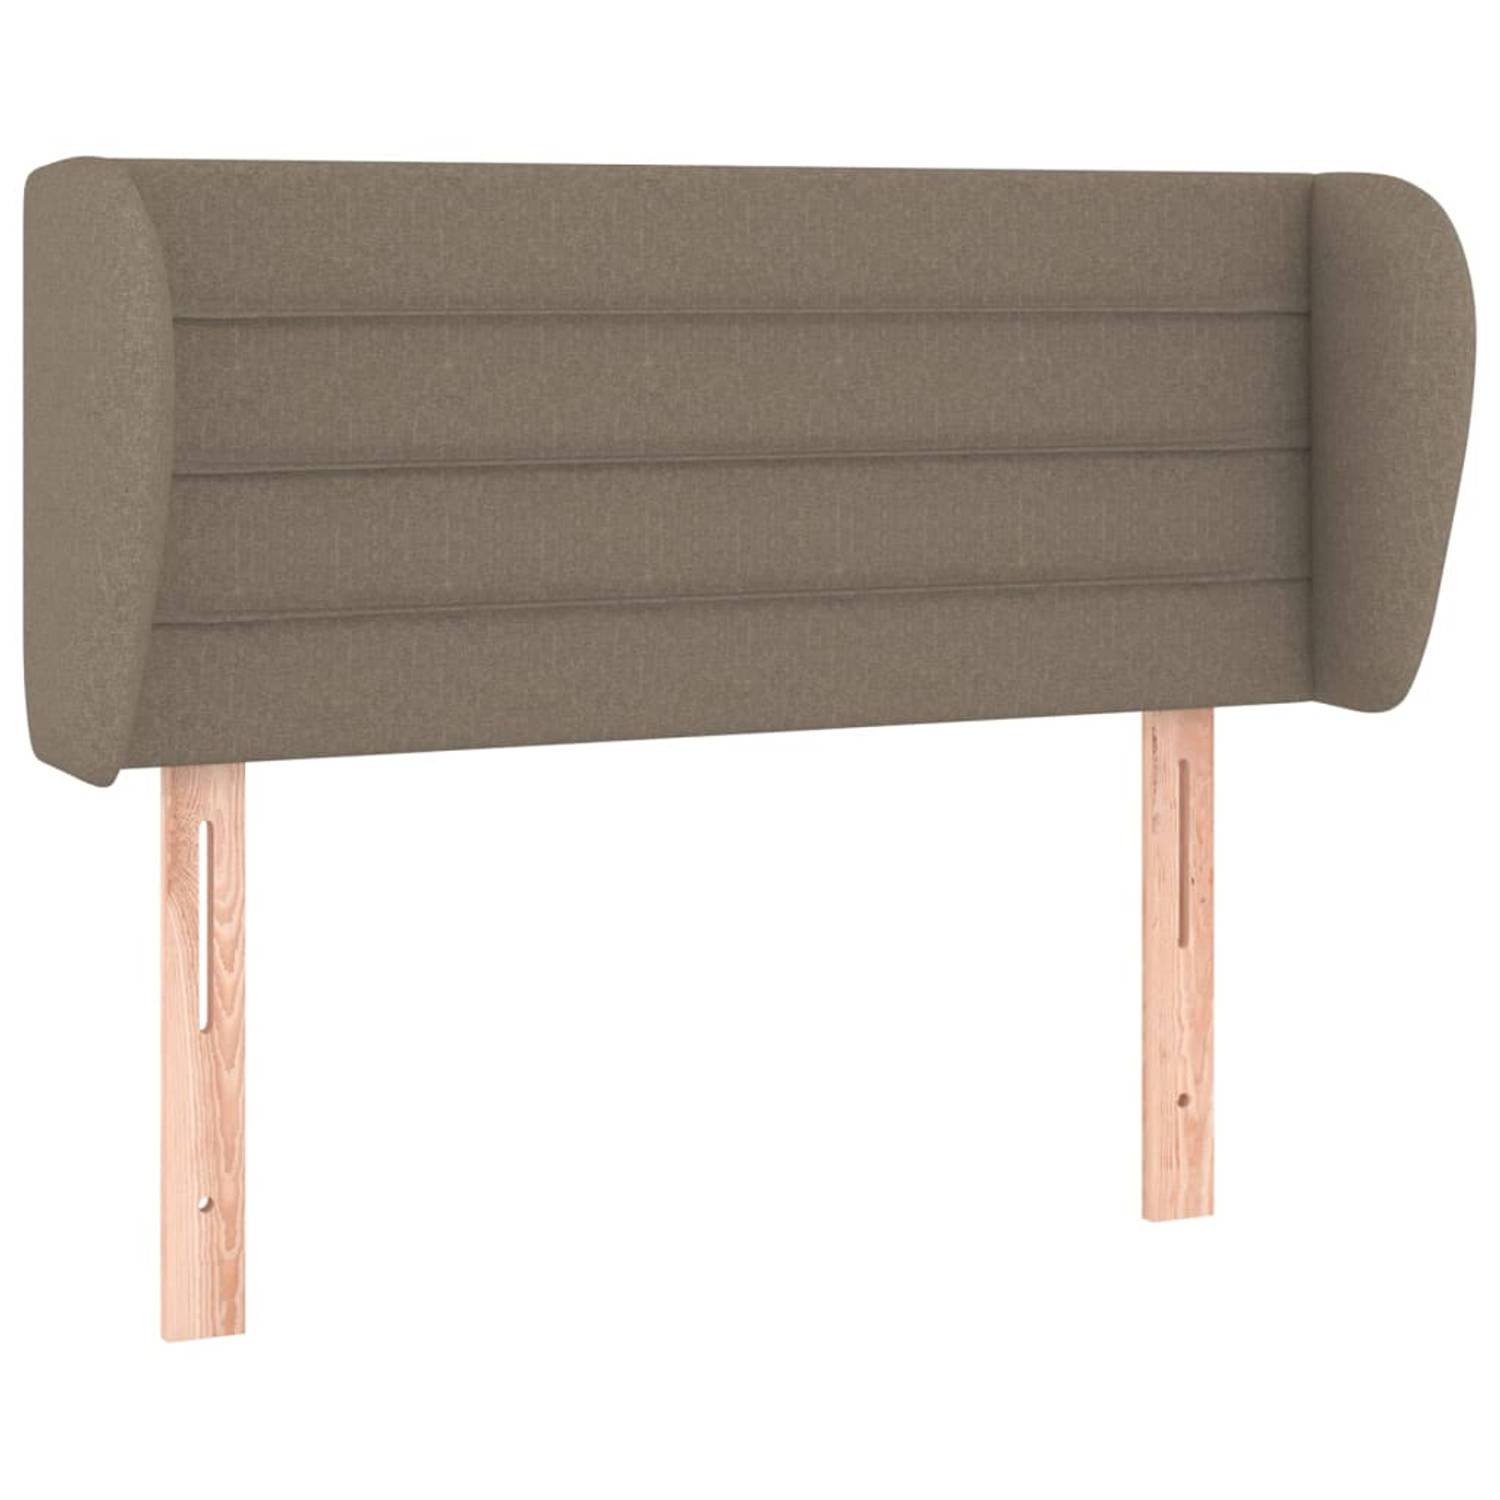 The Living Store Hoofdeind Lucca - Hoofdbord - Taupe - 83 x 23 x 78/88 cm